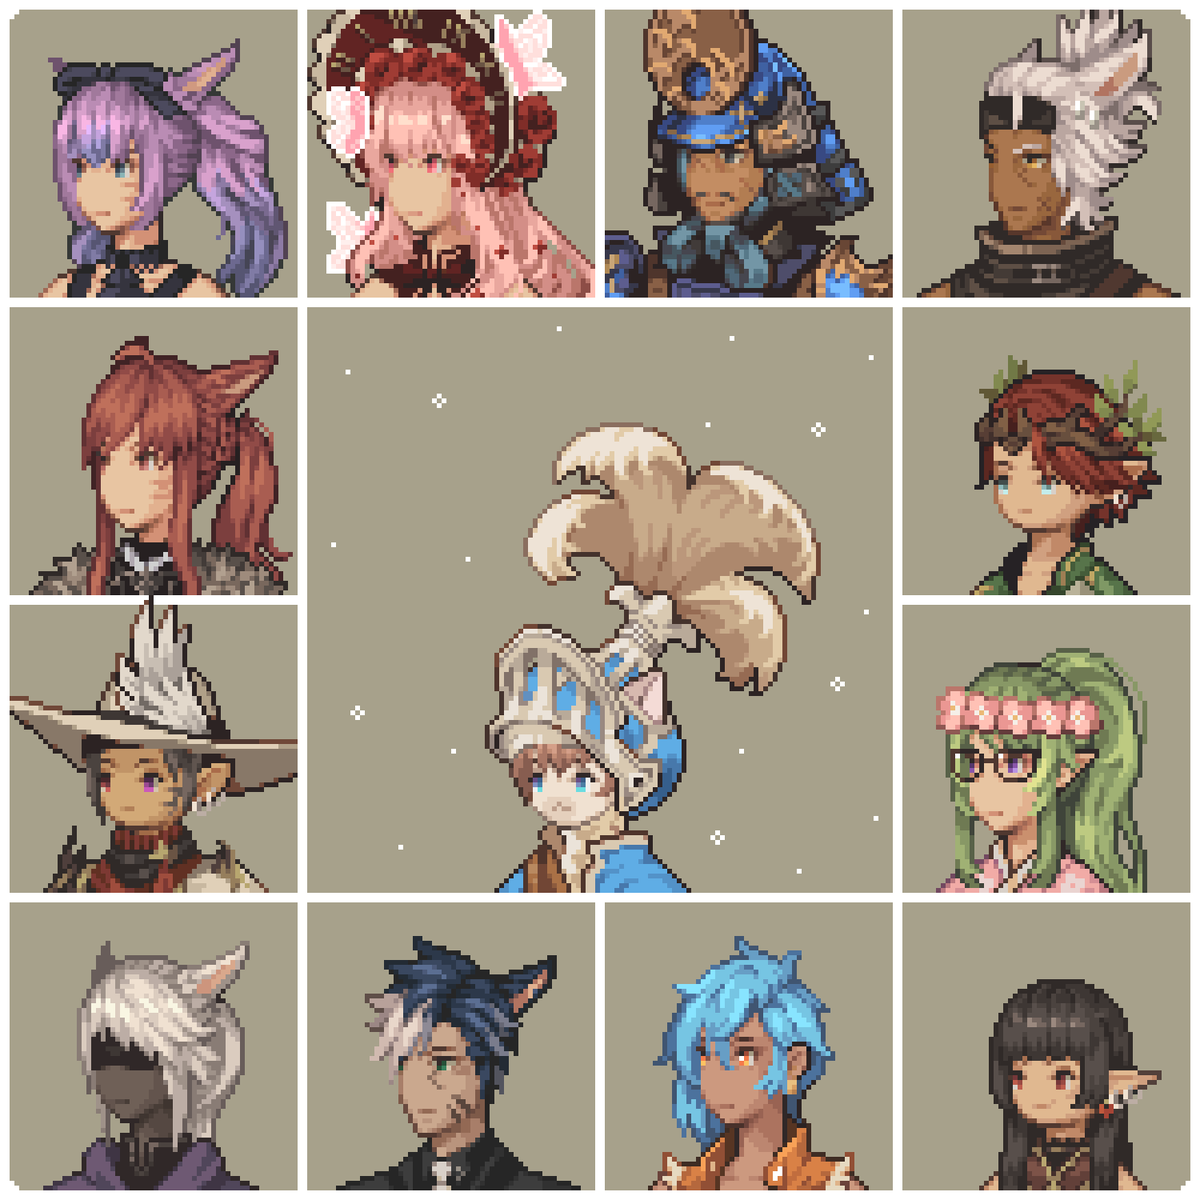 Final Fantasy Tactics portraits  
#pixelart 

comms open. starts at 60$ (price might increase if there are complex accessories)

15 slots DM or email for more info!  
✉️frogapples.art@gmail.com